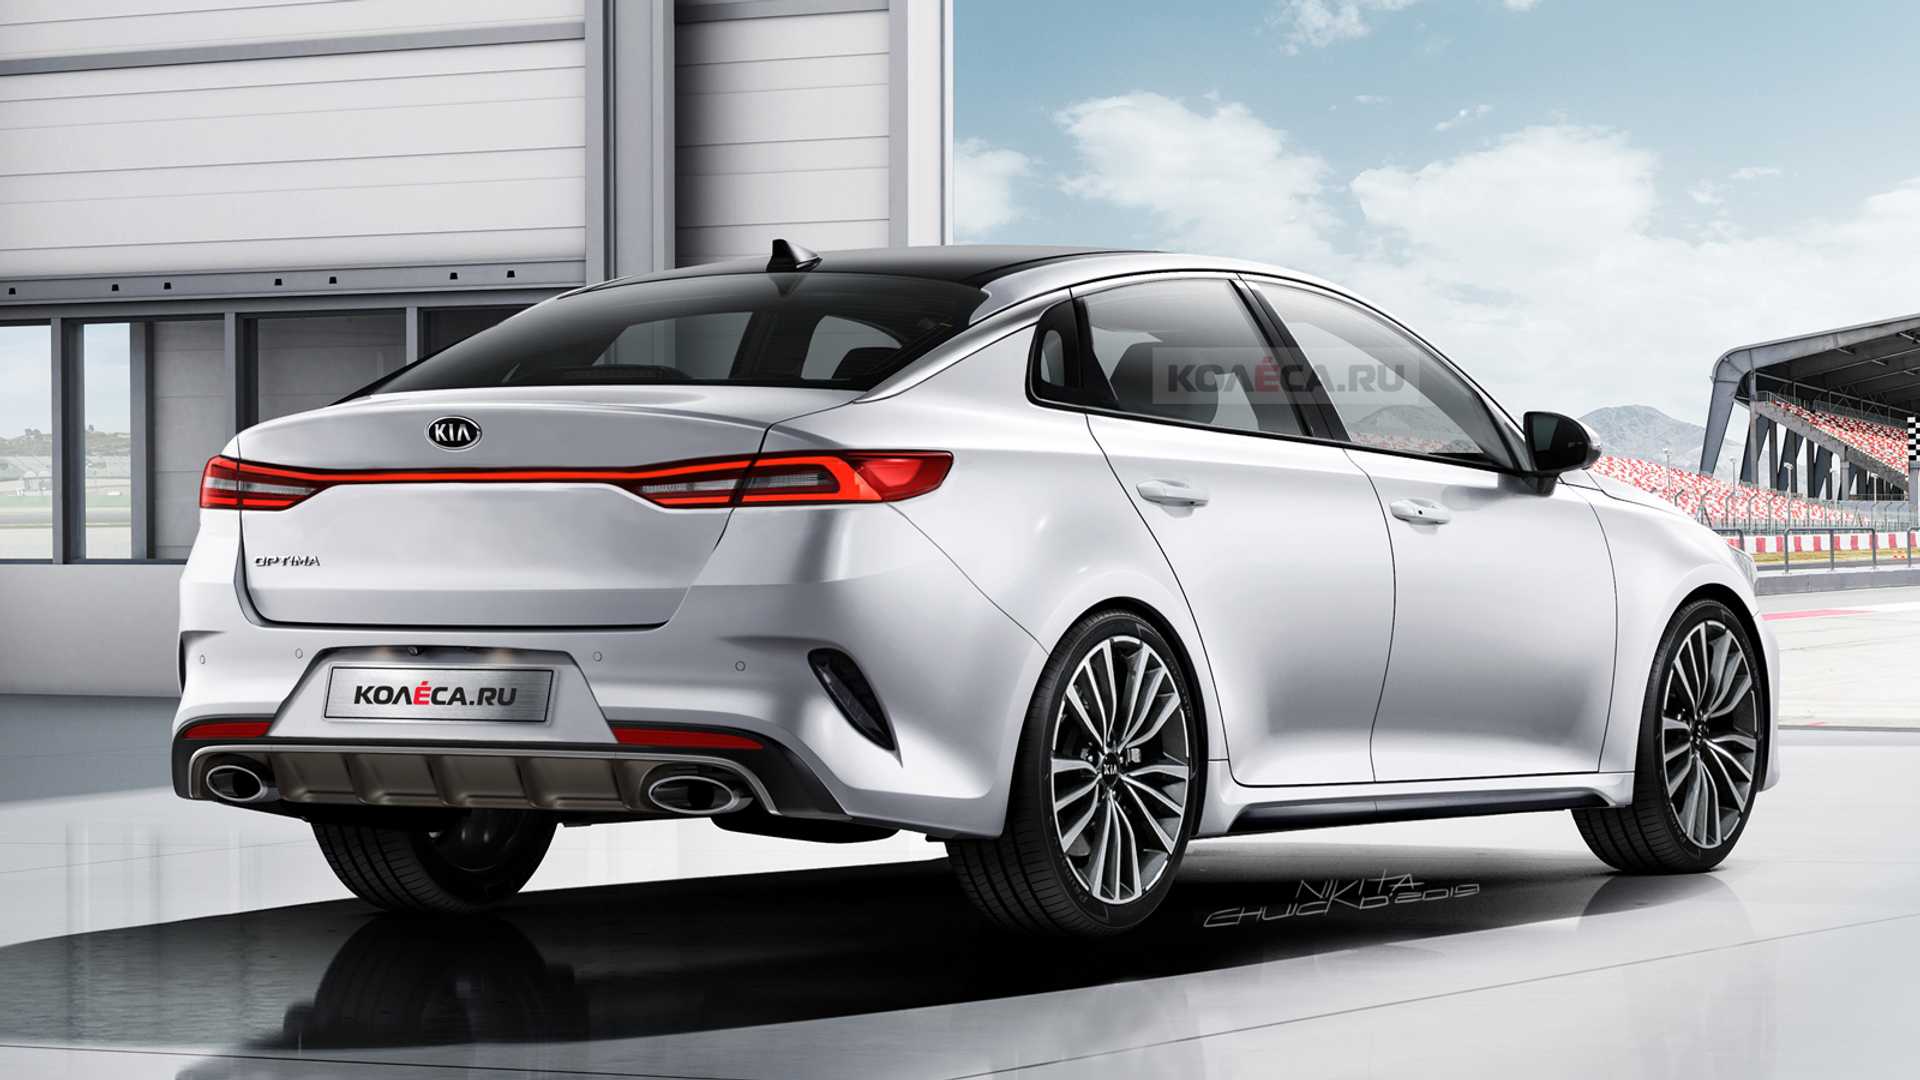 2021-kia-optima-could-look-more-conventional-than-sonata-which-is-a